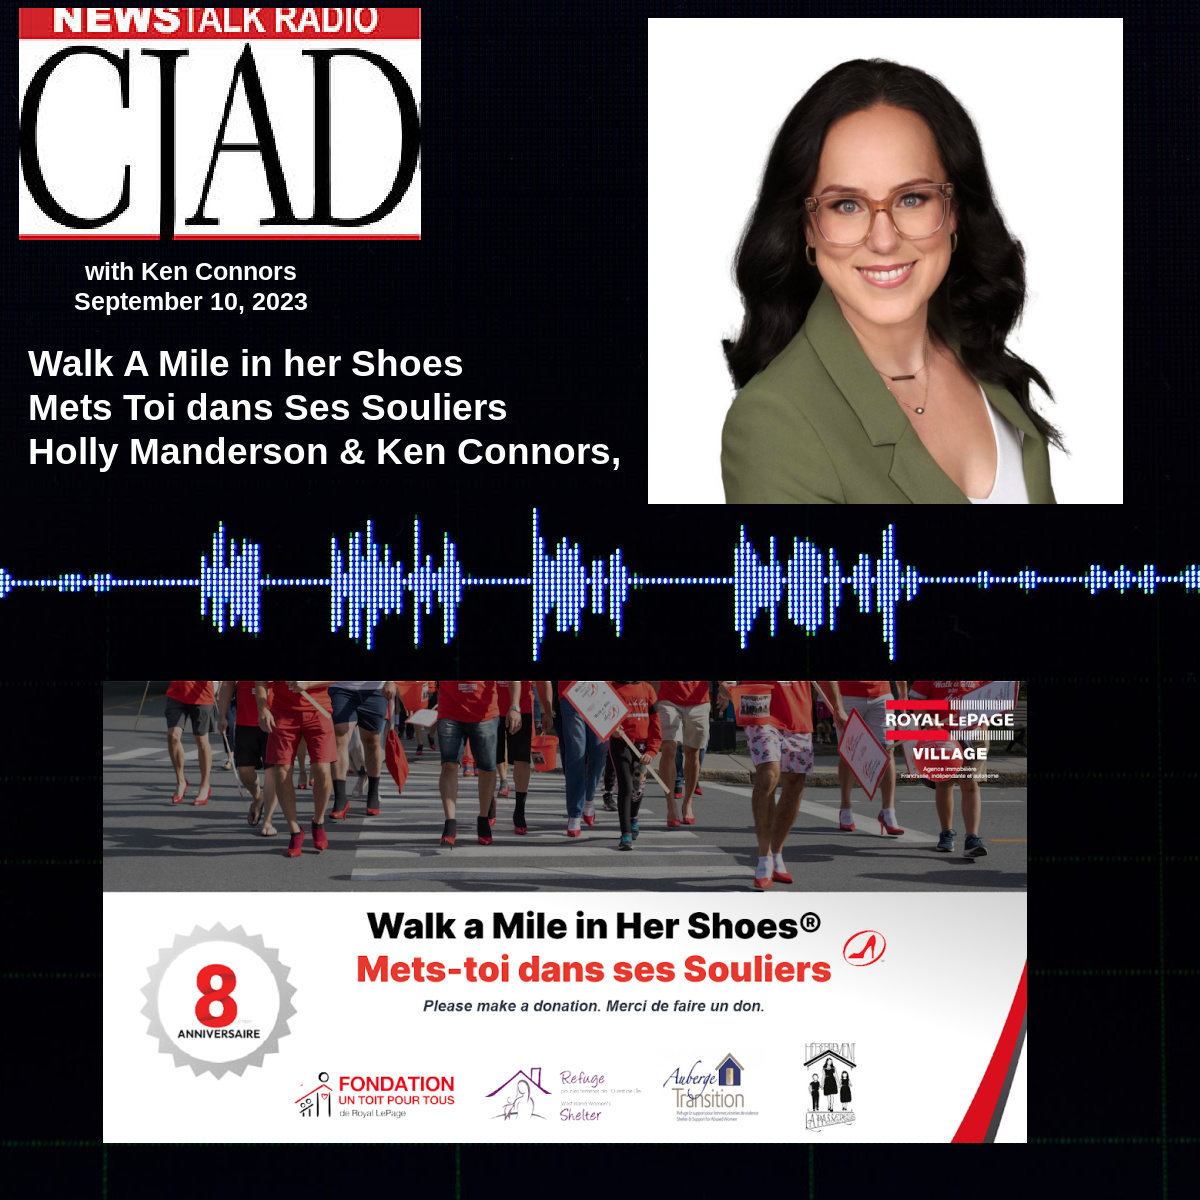 Holly Manderson Royal LePage Village Walk A Mile in Her Shoes